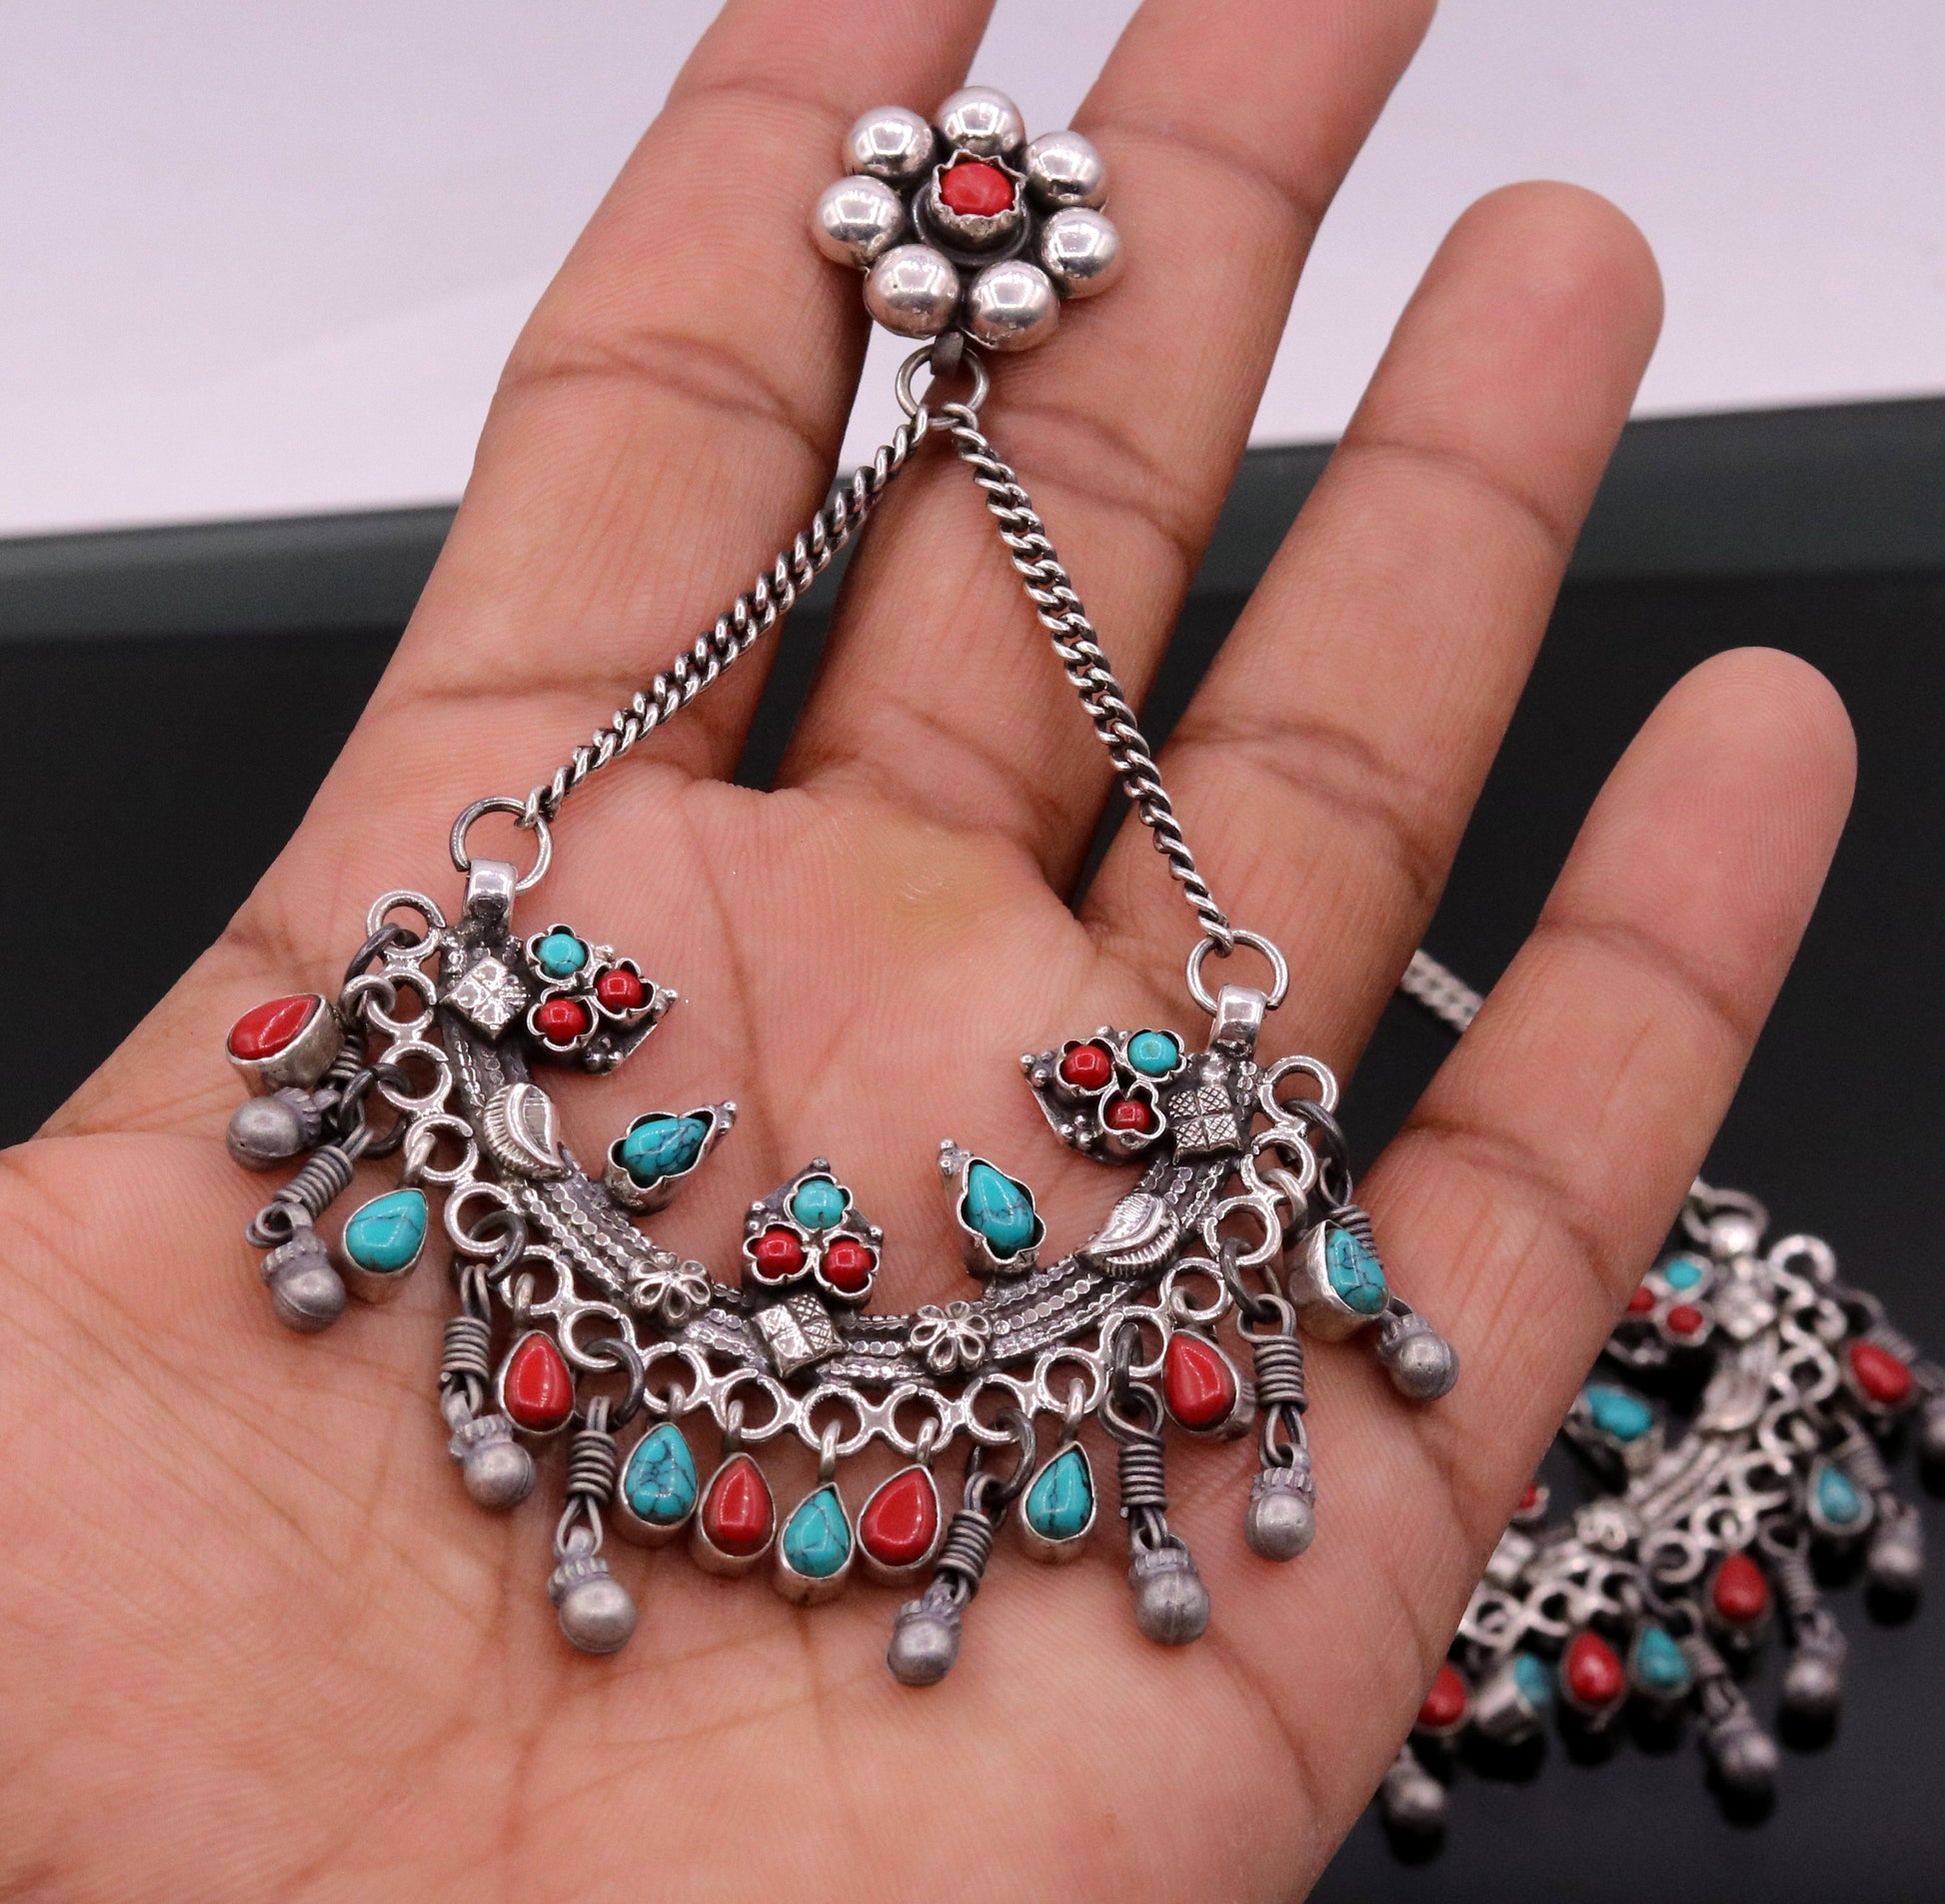 925 sterling silver handmade turquoise and coral stone fabulous long charm earring stud, drop dangle chandbala chandelier style jewelry s723 - TRIBAL ORNAMENTS